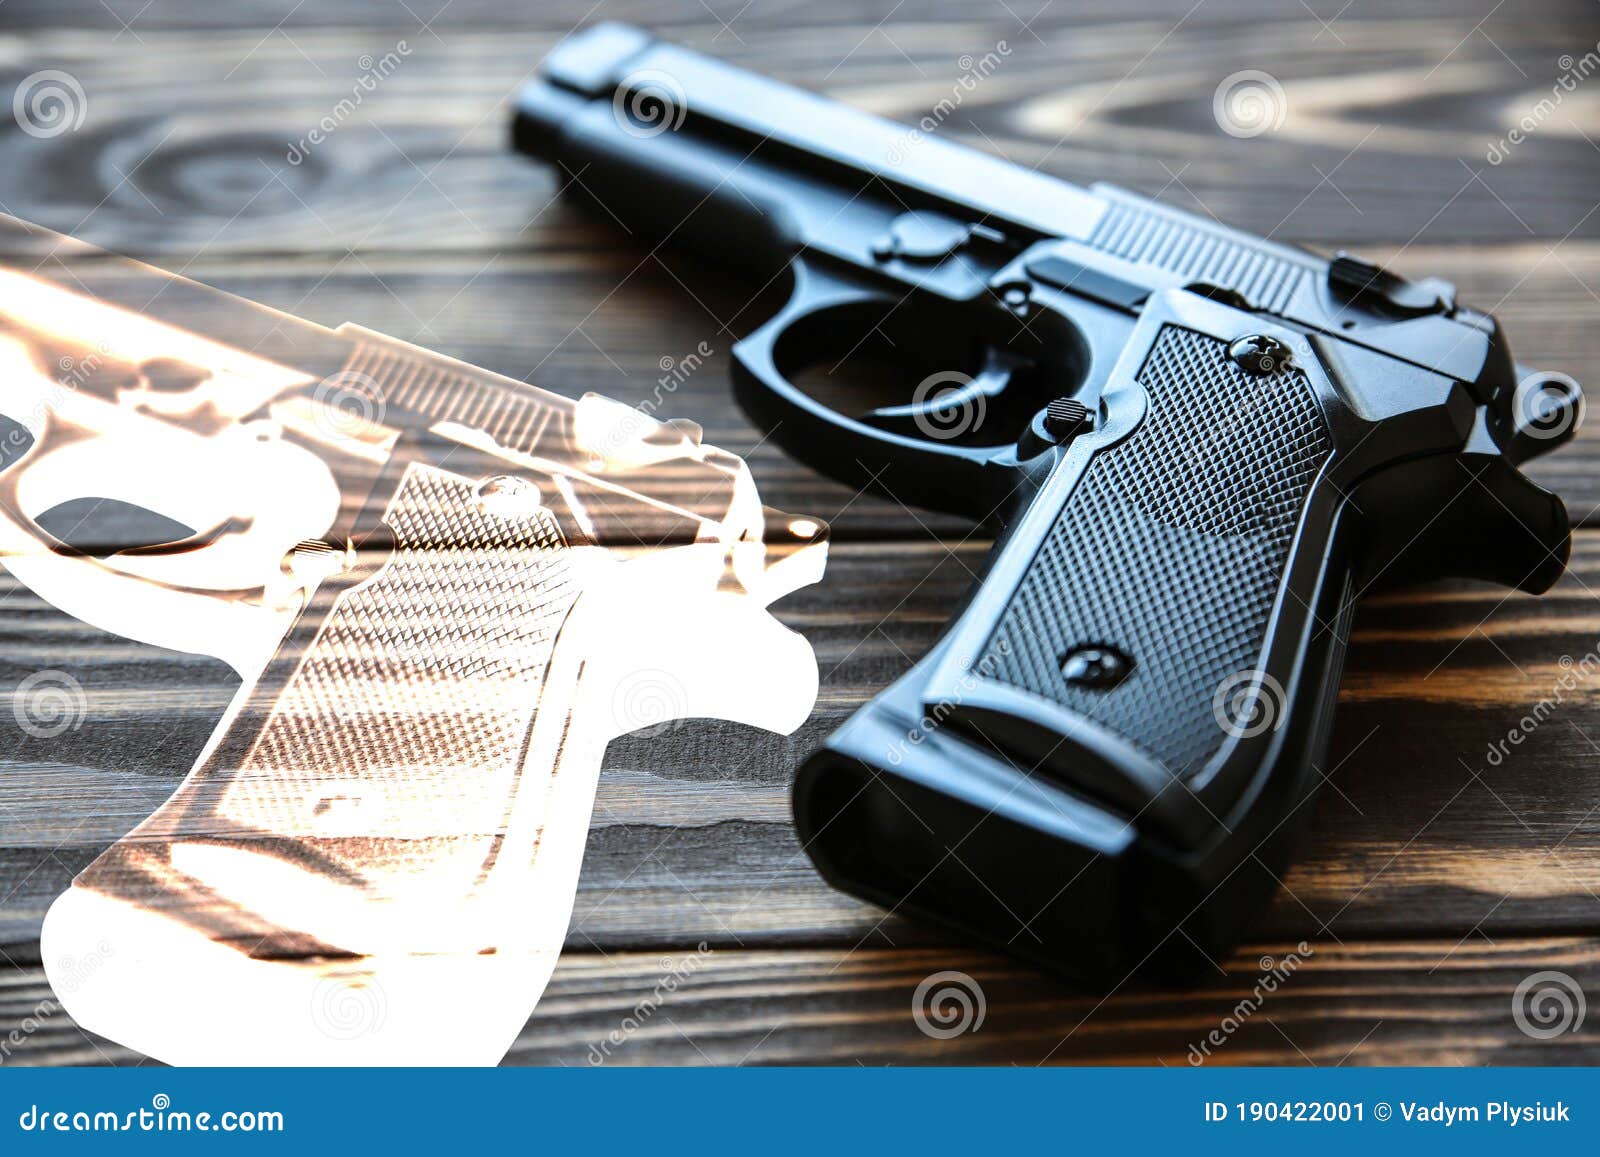 gun lying on wooden background. legalization of weapon